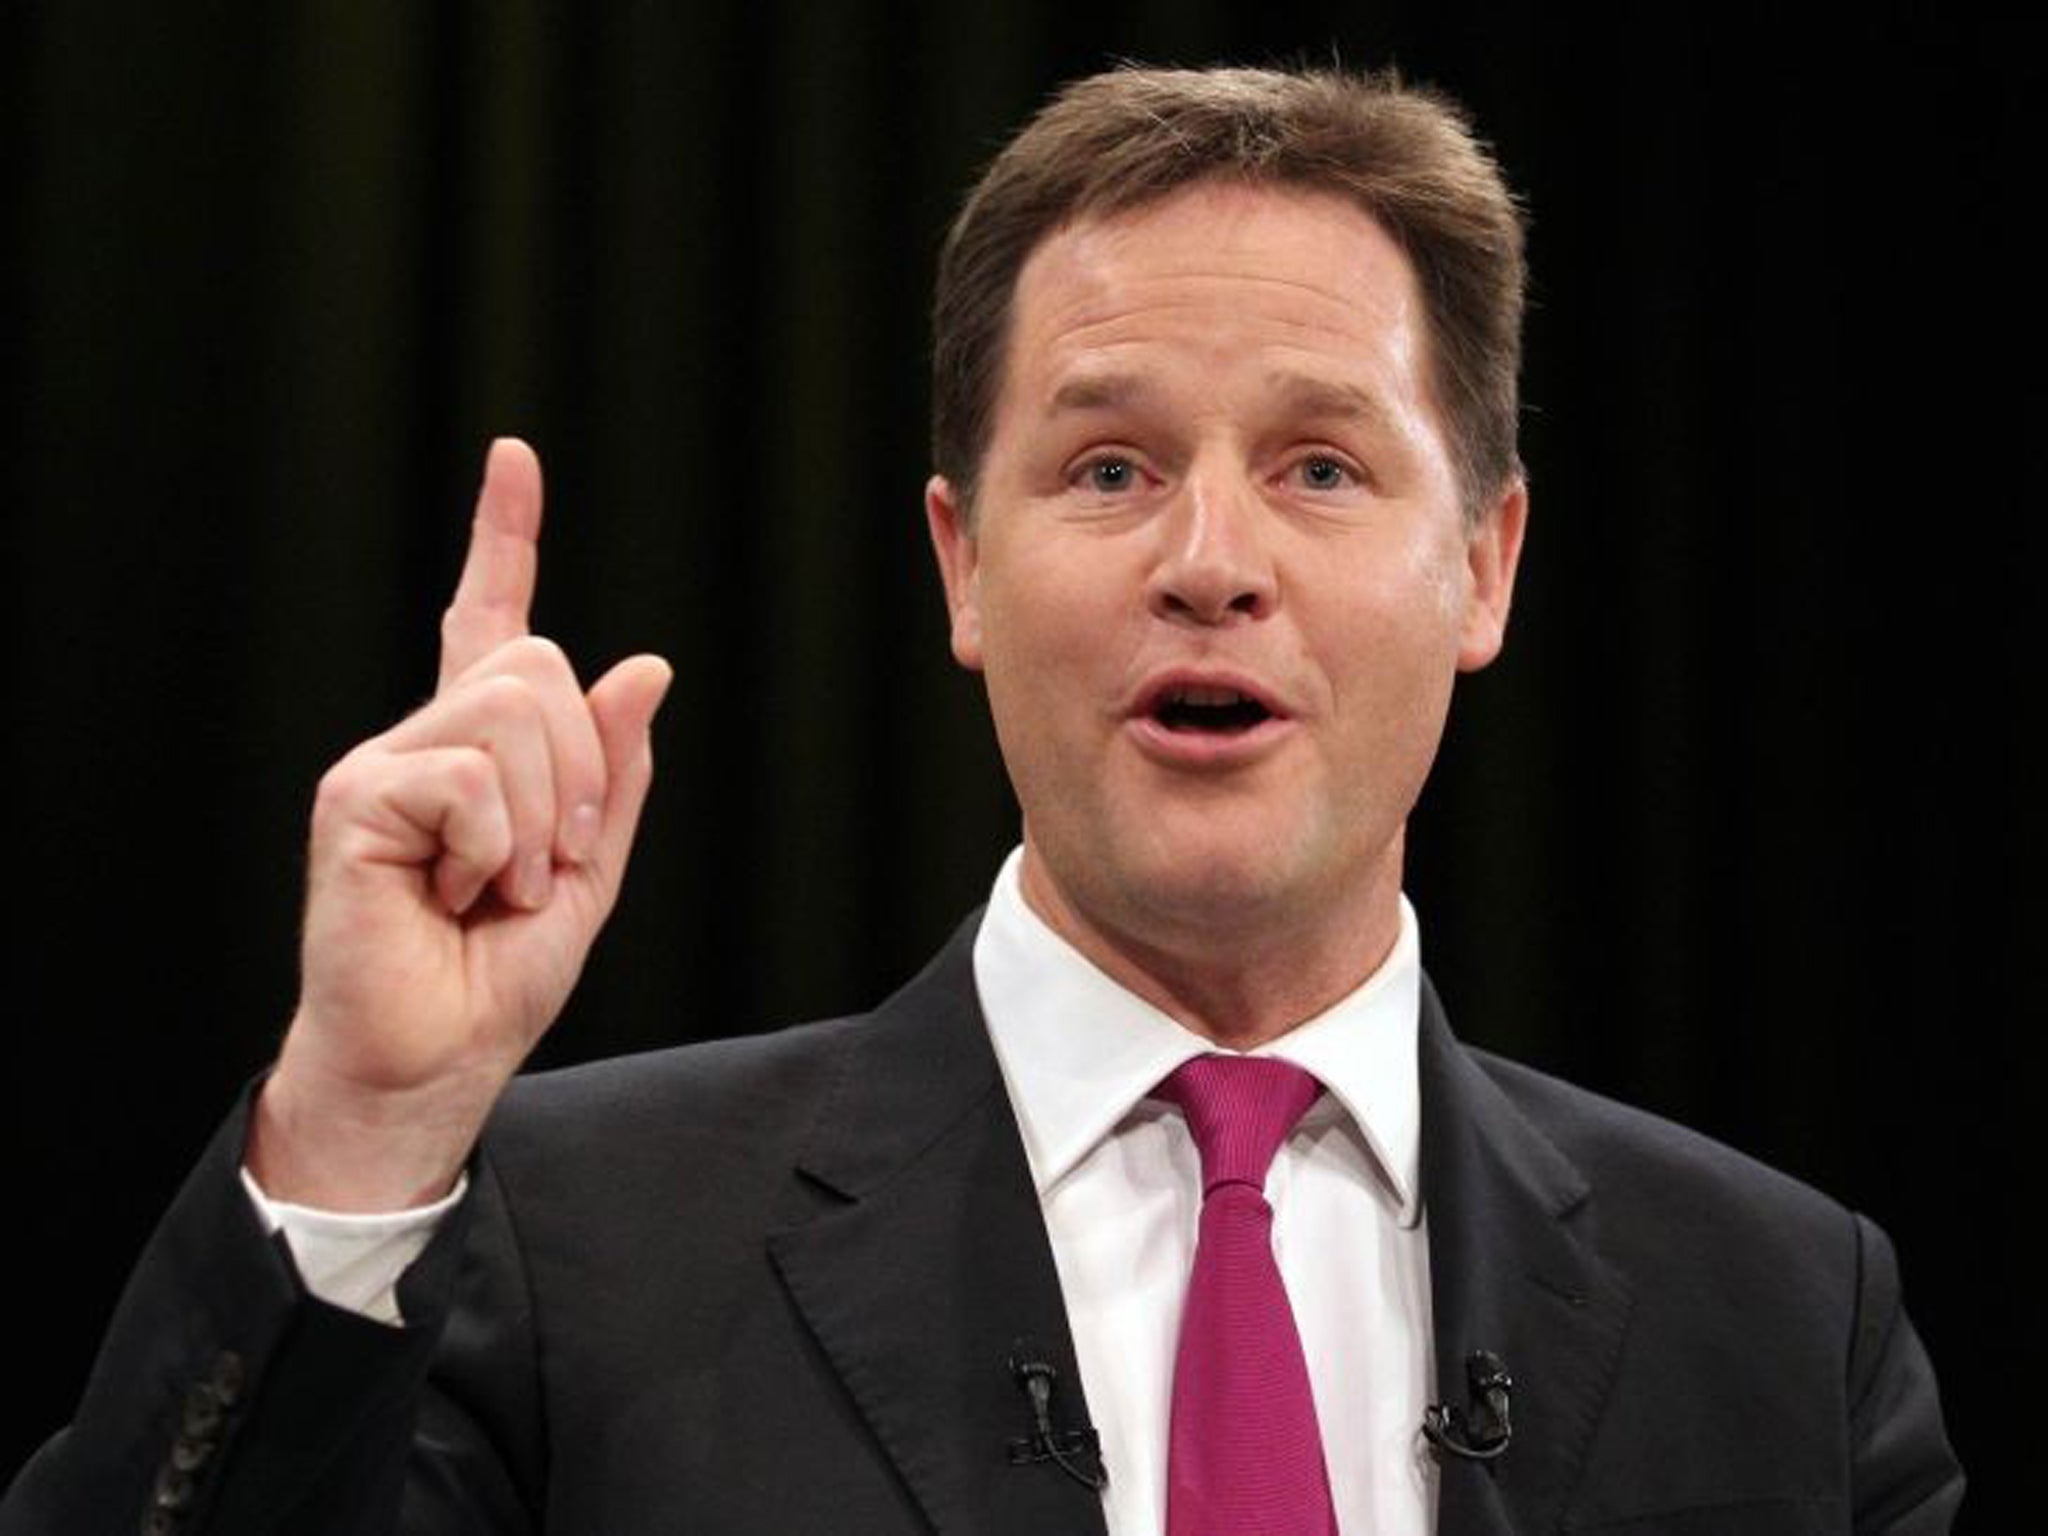 Deputy Prime Minister Nick Clegg has issued a warning to the Tories to concentrate on fighting the “firestorm” in the eurozone rather than trying to re-negotiate Britain's membership of the European Union